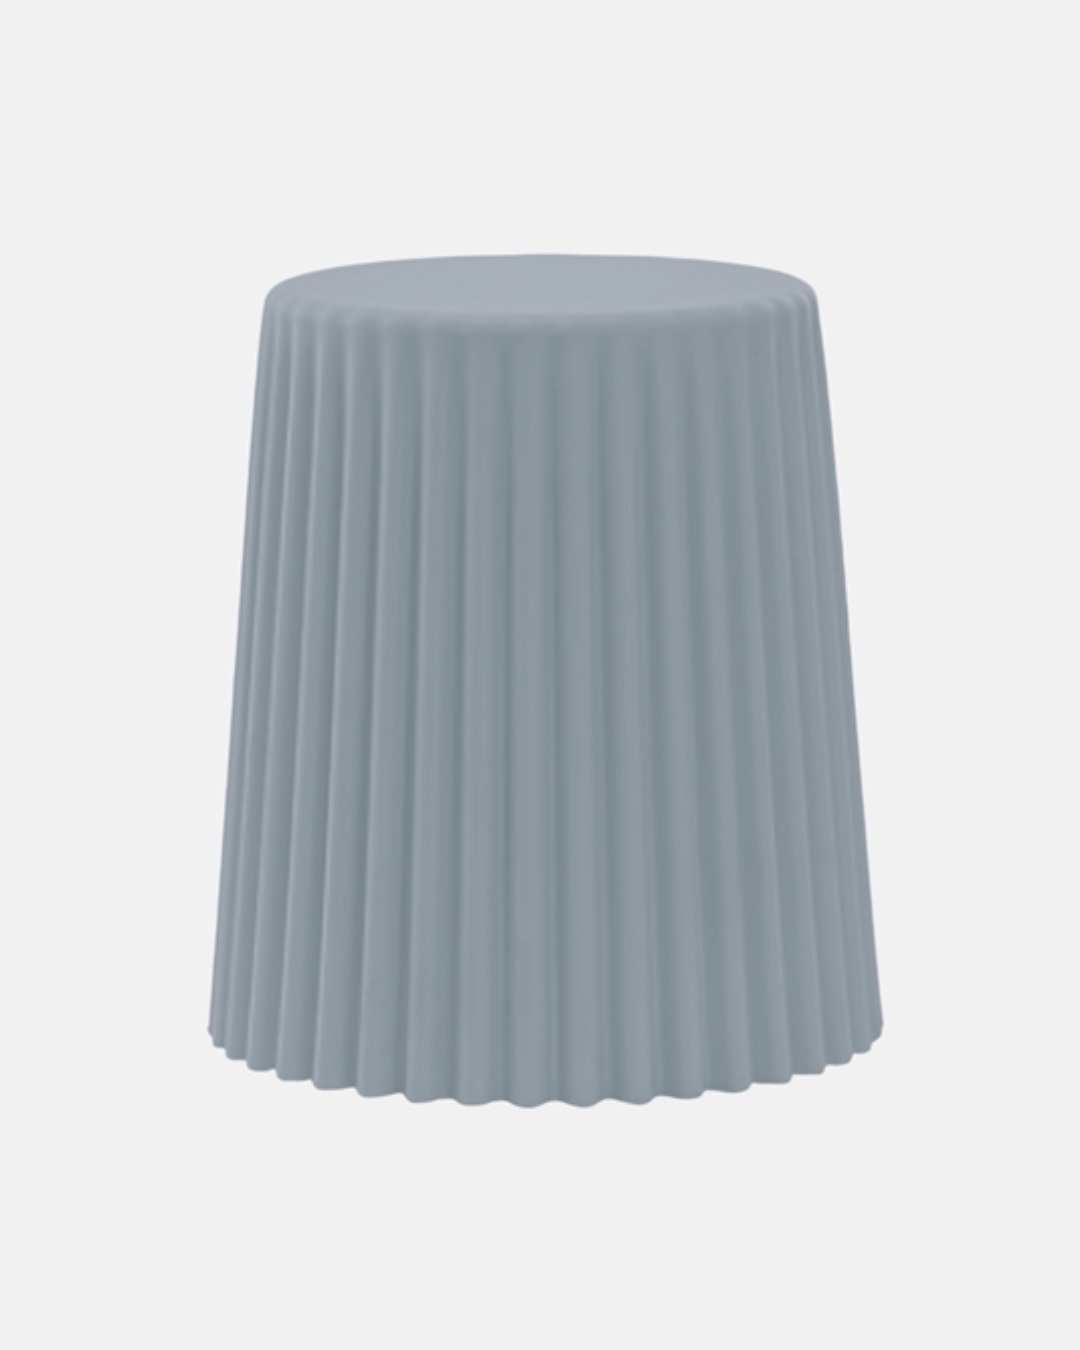 Grey Tom stool or side table